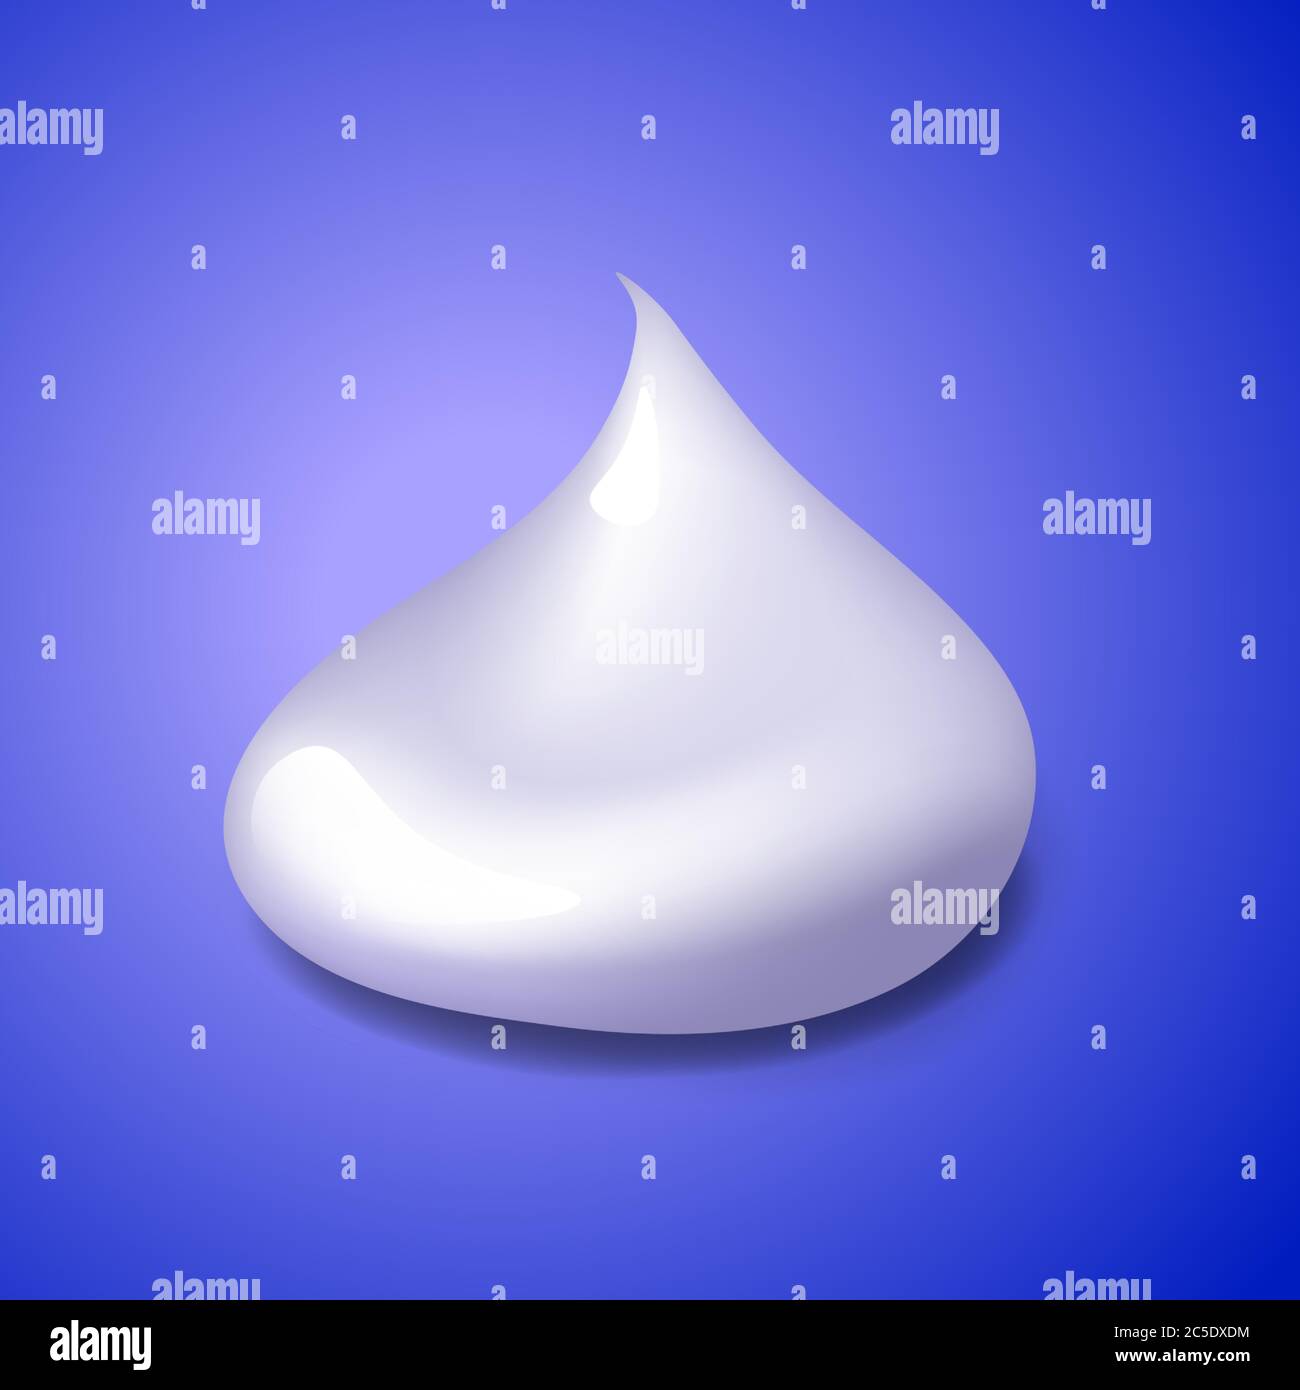 Realistic shaving gel or shaving foam cream soap mousse icon Vector realistic illustration isolated on blue background. Stock Vector